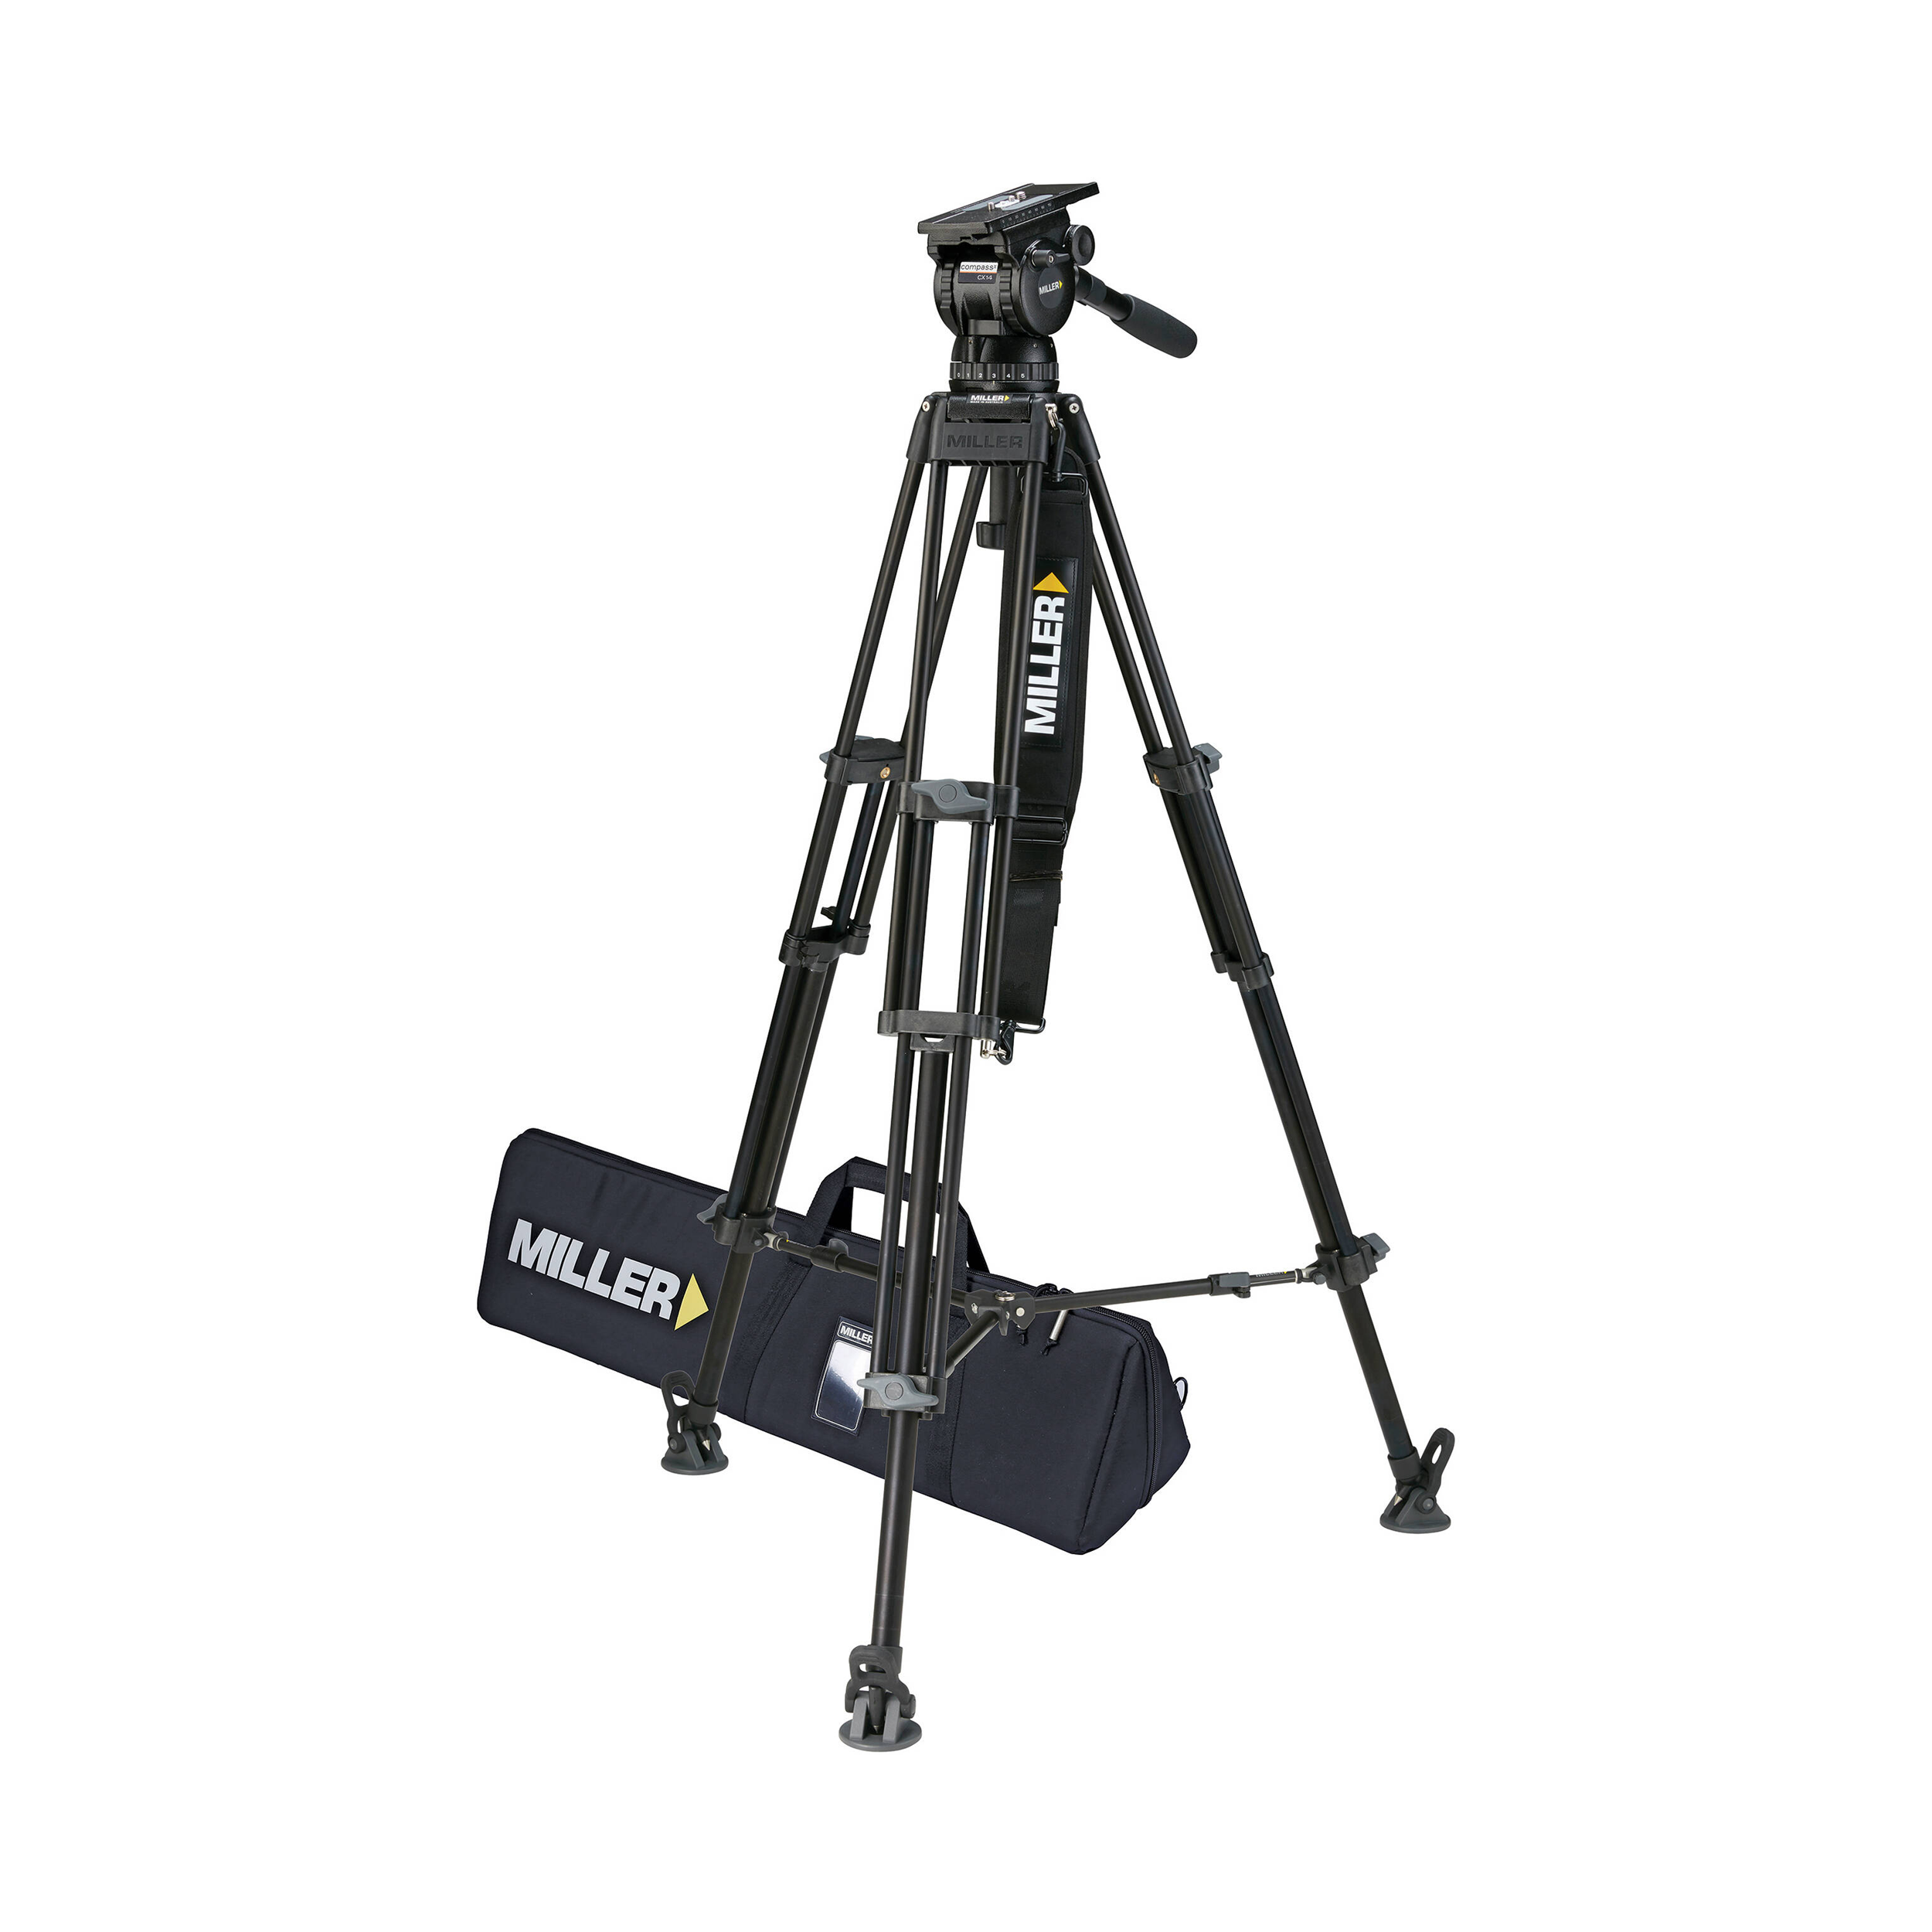 MILLER CX14 (1097) Toggle 2-St Alloy Tripod (402) AG Spreader (508) Pan Handle (679) Strap (1520) Feet (550) Softcase (3514)